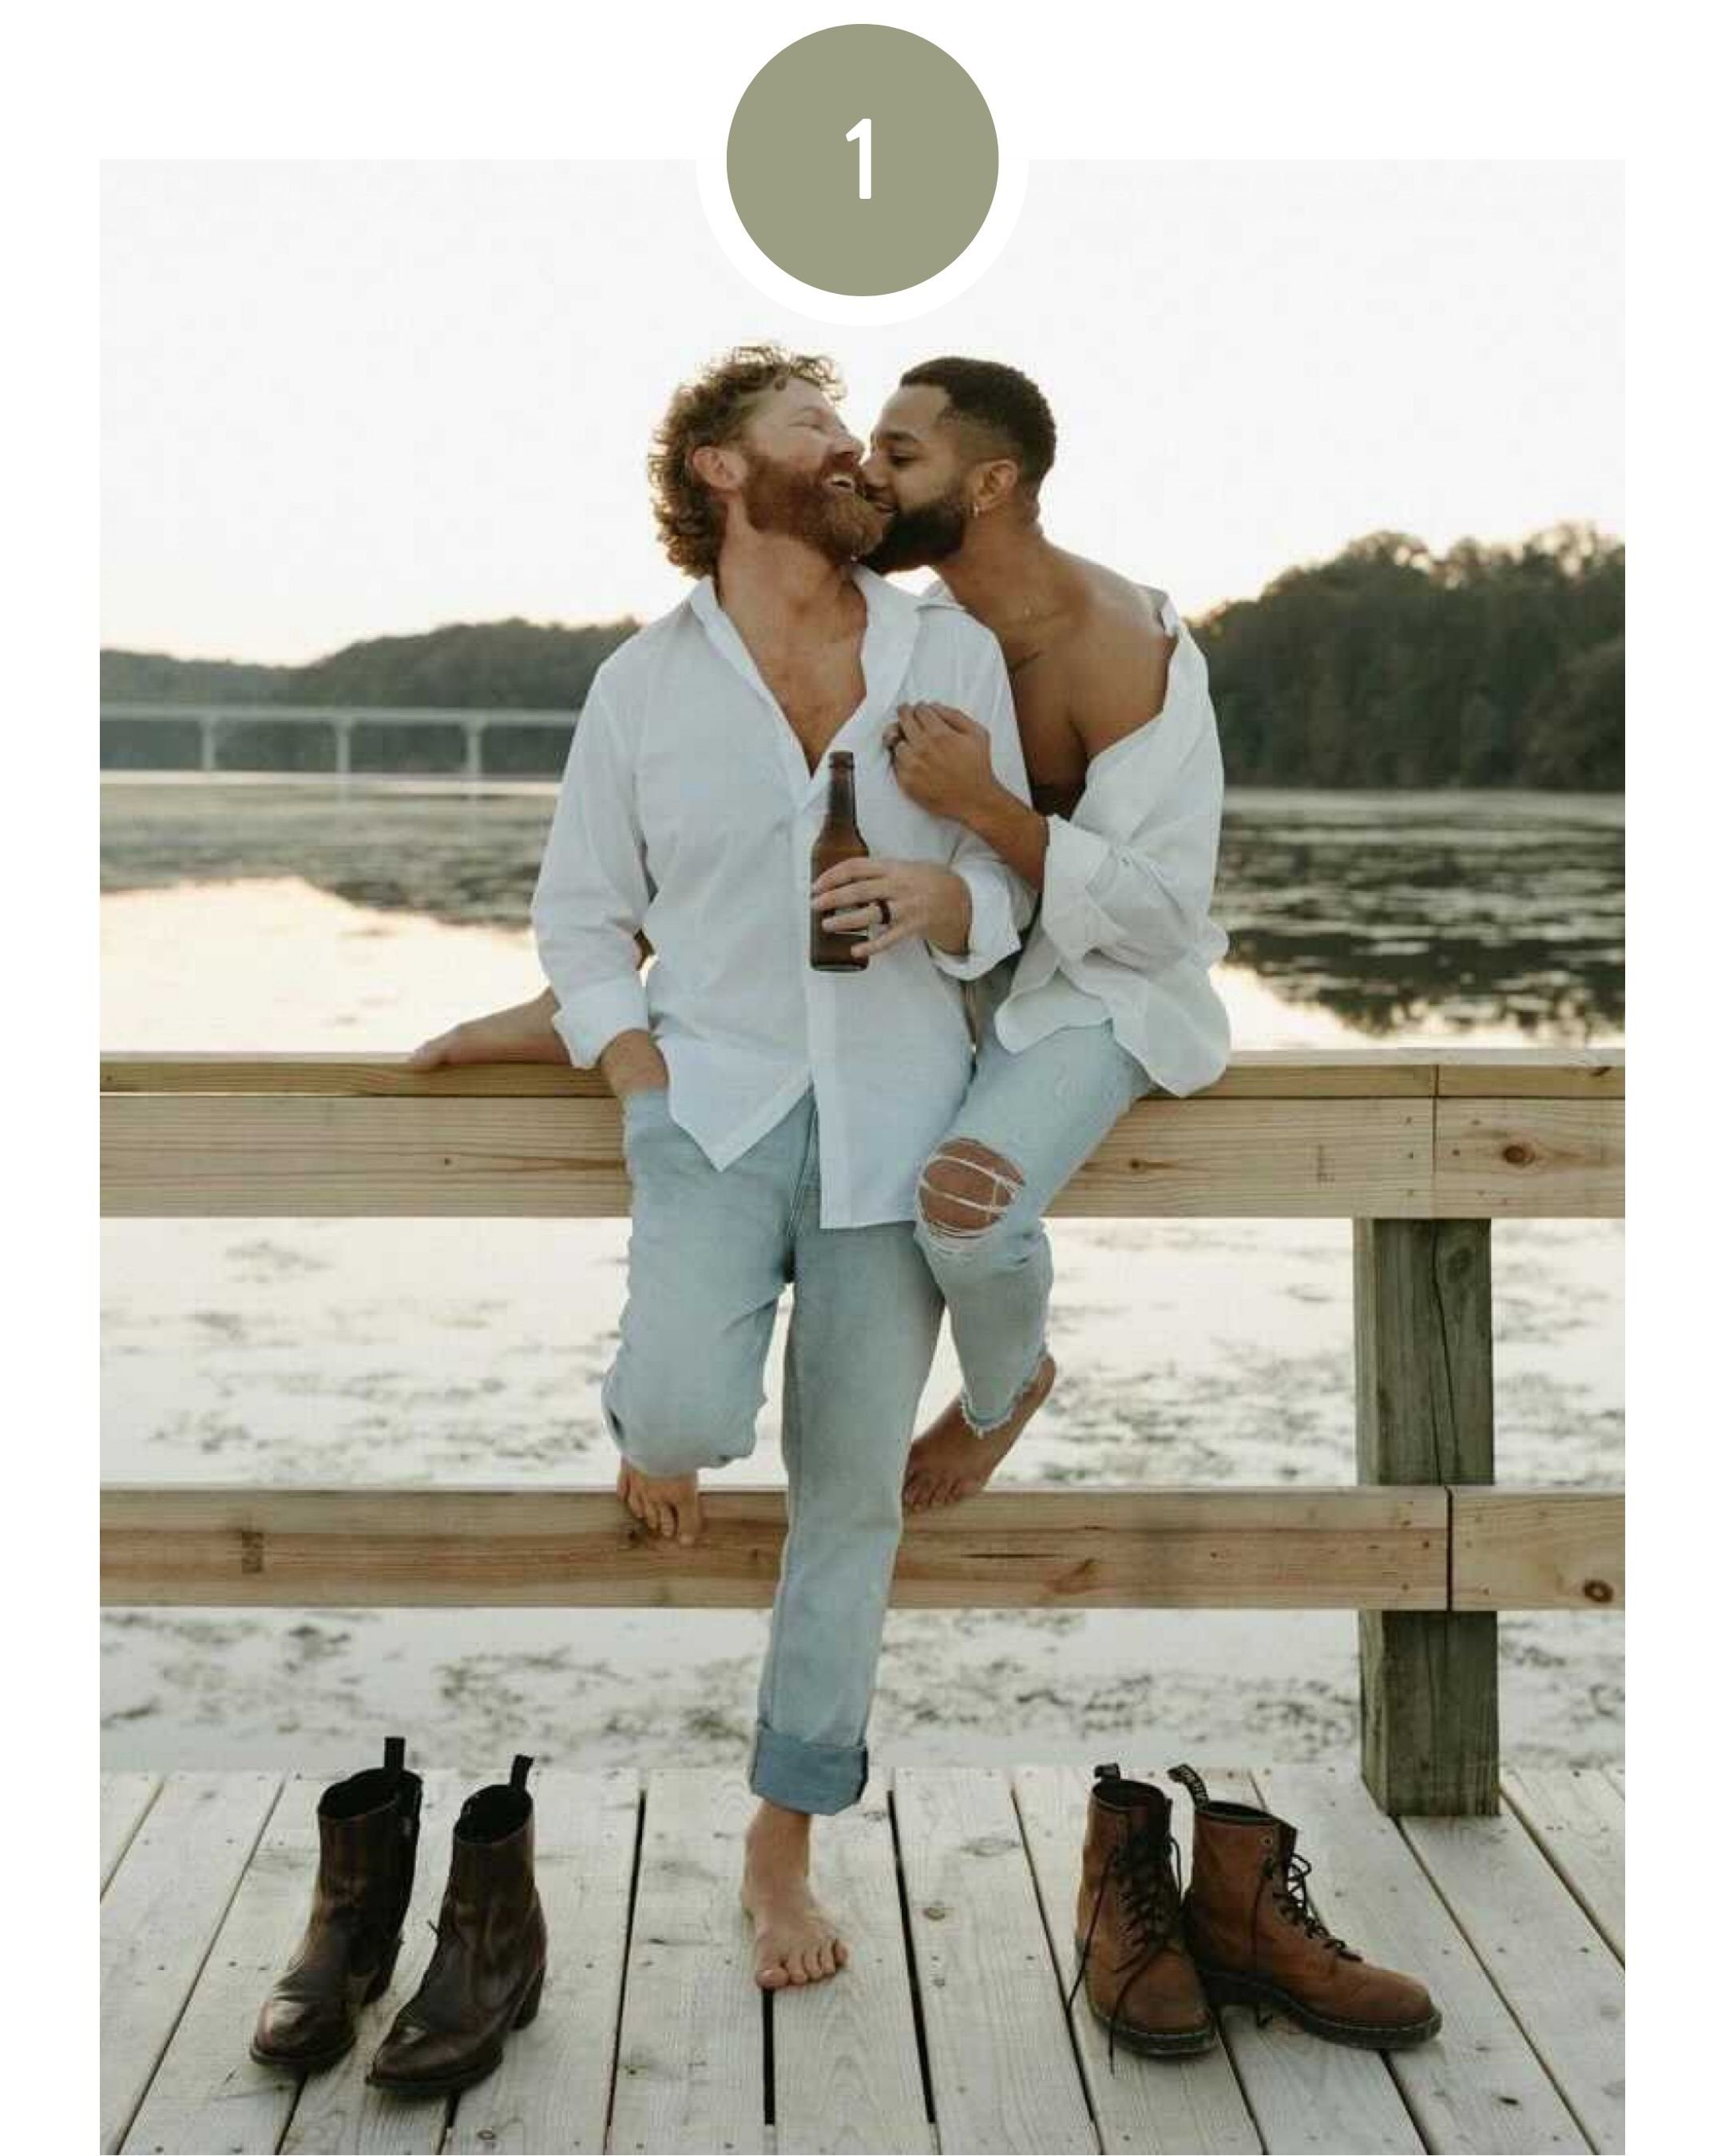 Intimate Couple Photography Poses